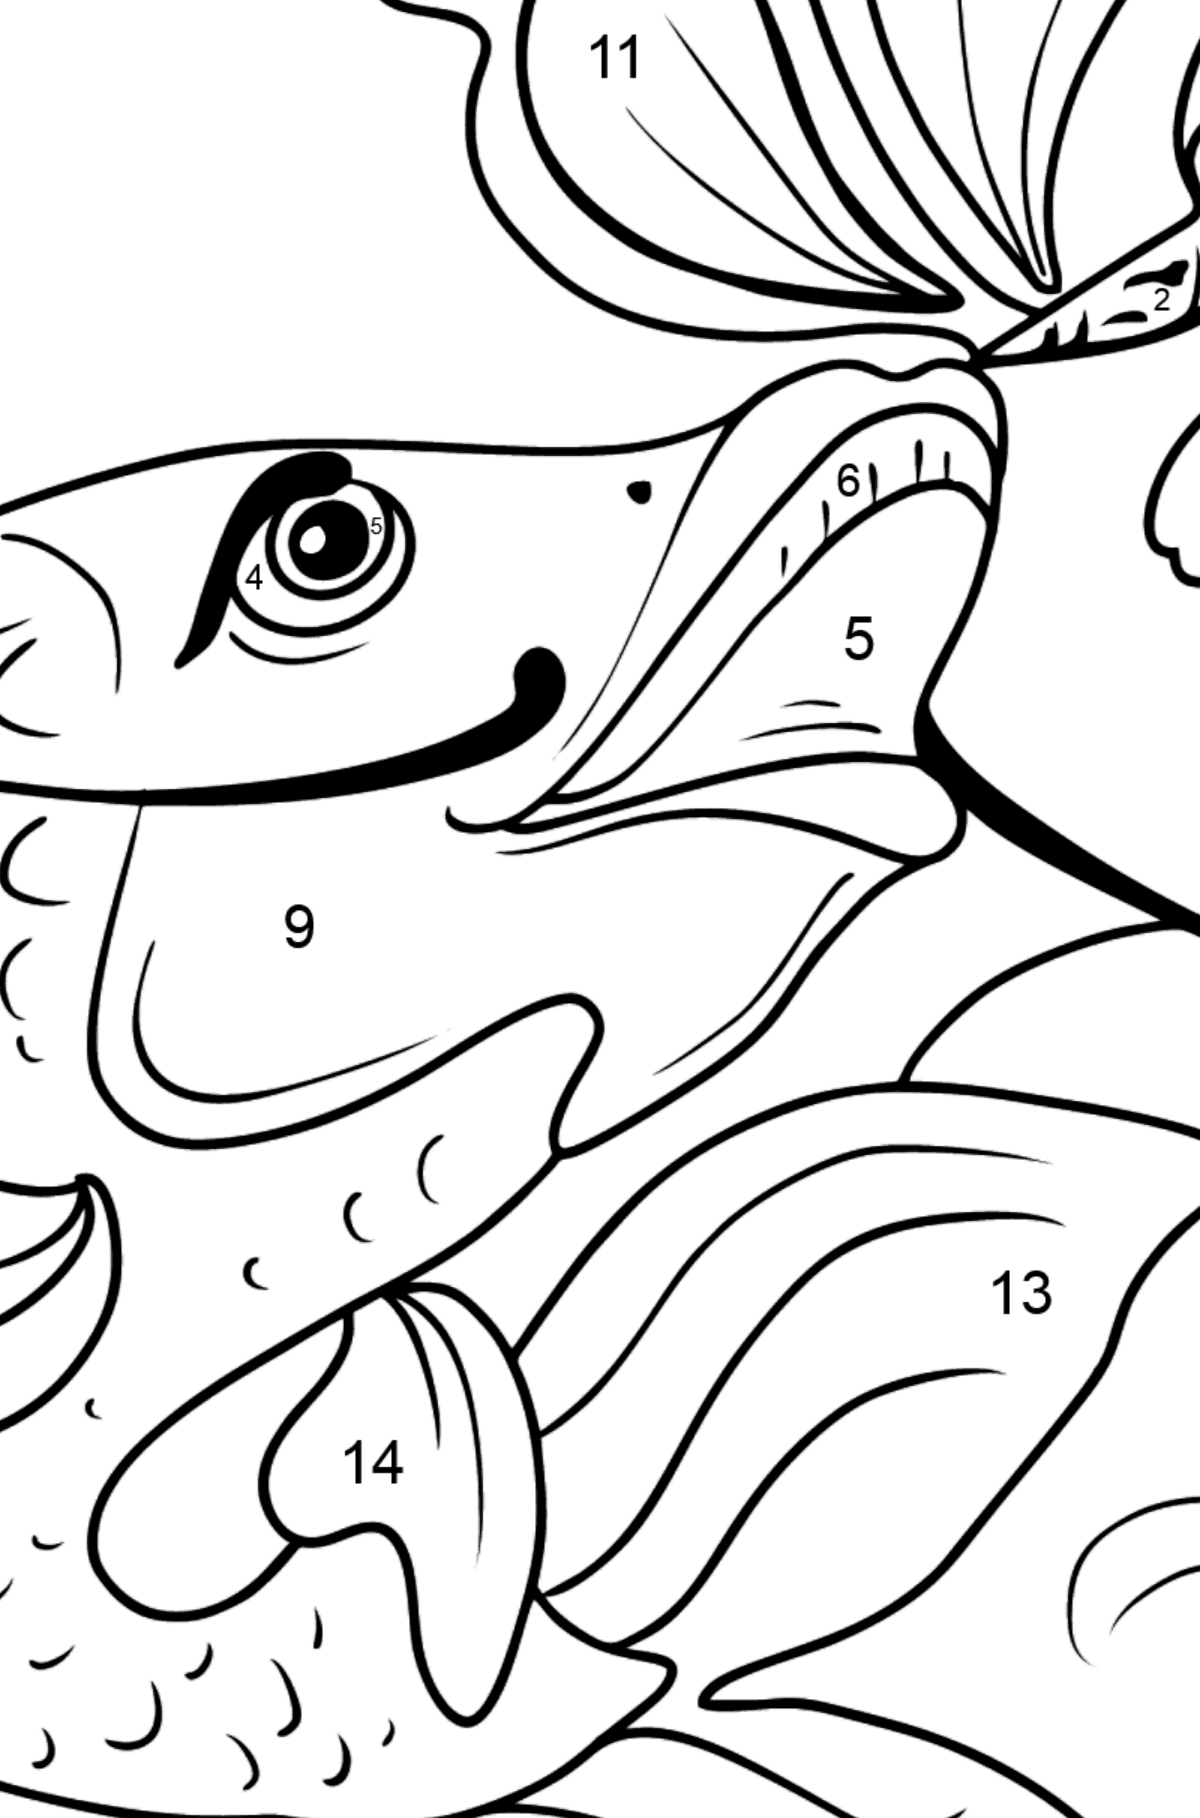 Fish and Butterfly coloring page - Coloring by Numbers for Kids